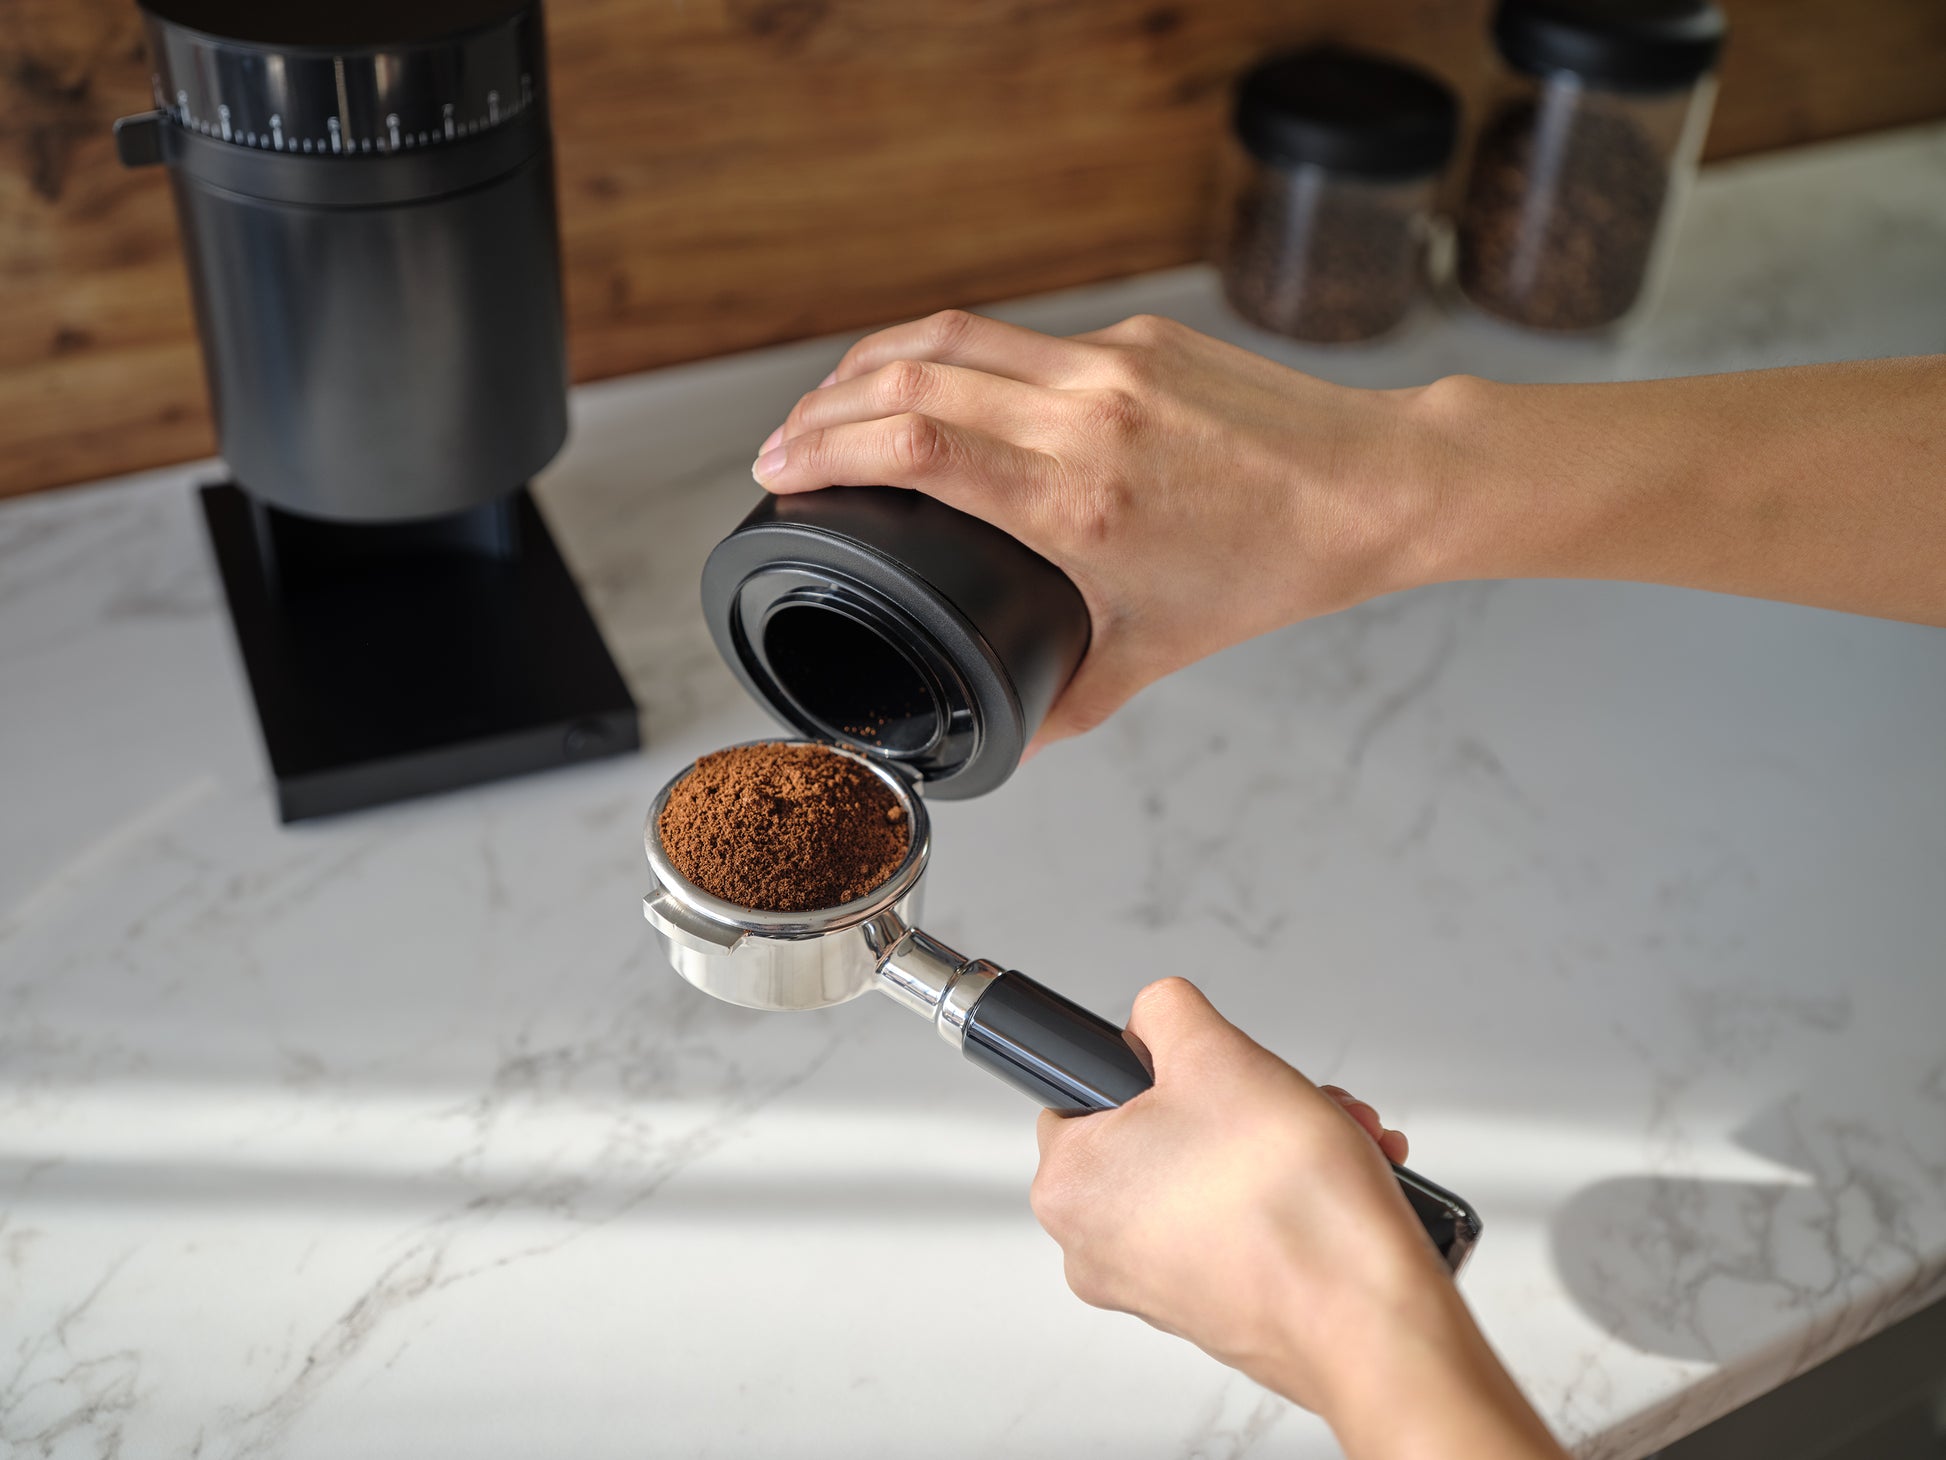 A guide to coffee grinders - part 1: blades or conical burrs